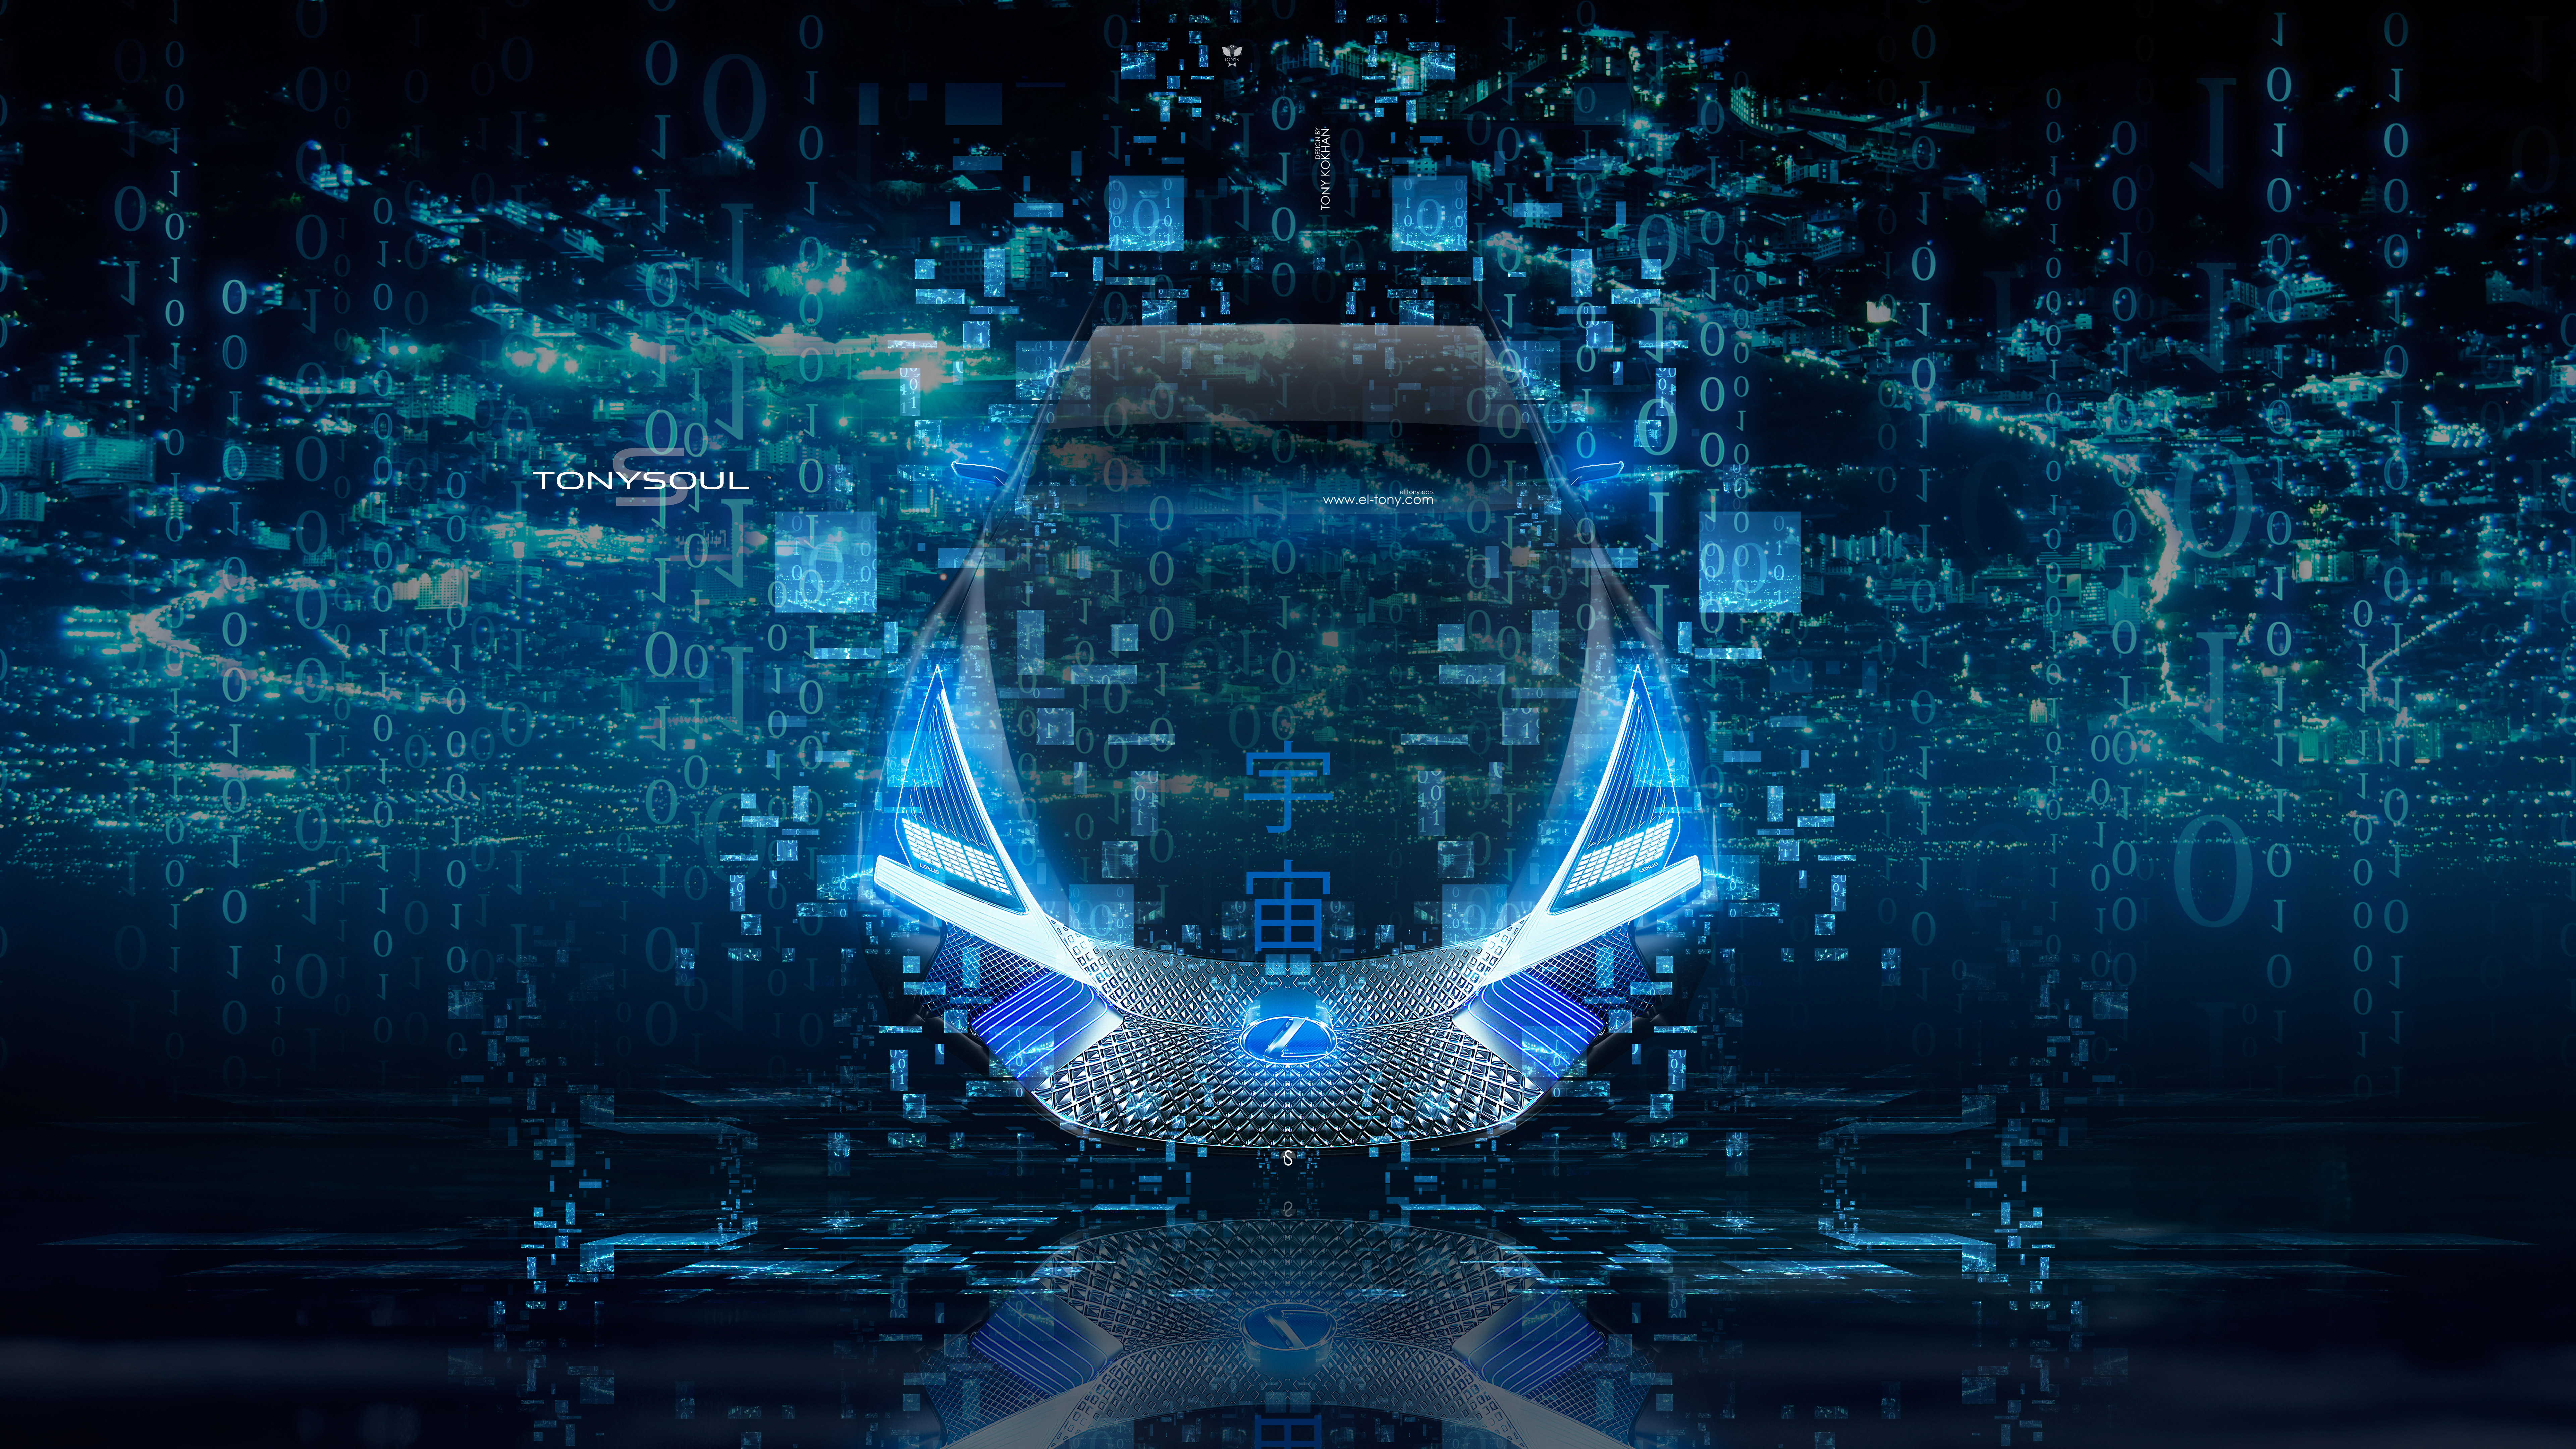 Lexus-LS-Plus-FrontUp-Universe-Space-TonySoul-Super-Crystal-Neural-Network-Square-Effects-Neon-Fly-BinaryCode-Art-Car